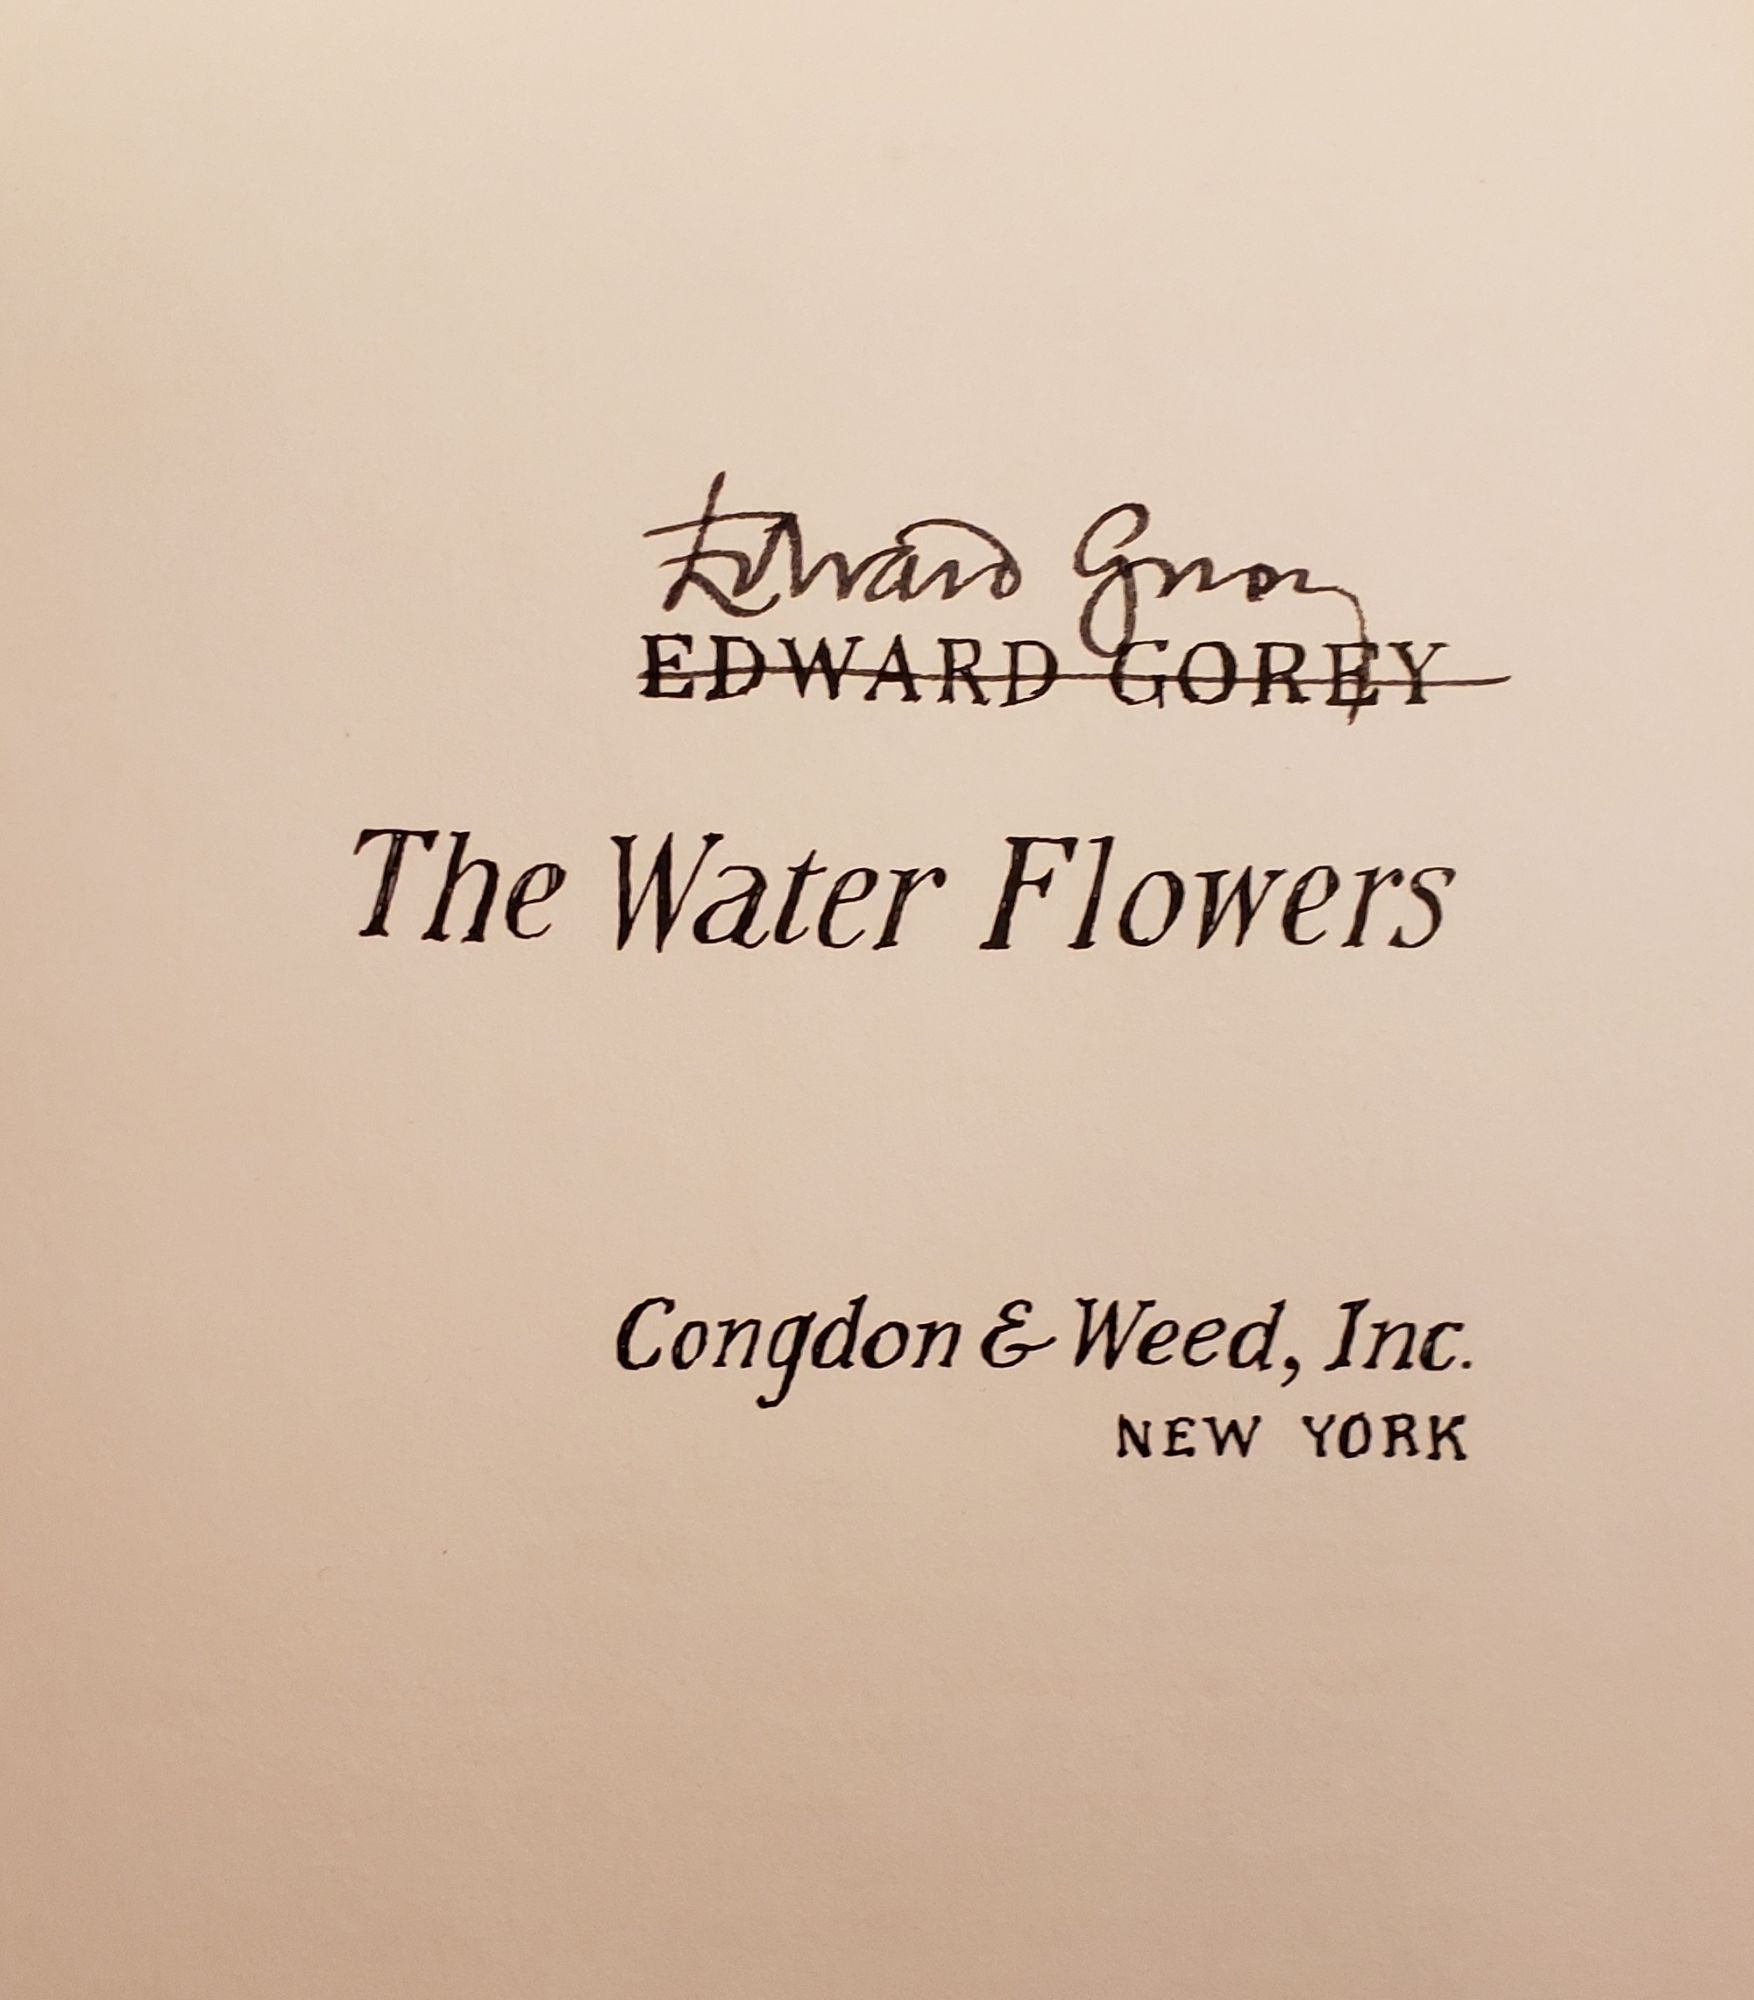 The Water Flowers by Edward Gorey on WellRead Books